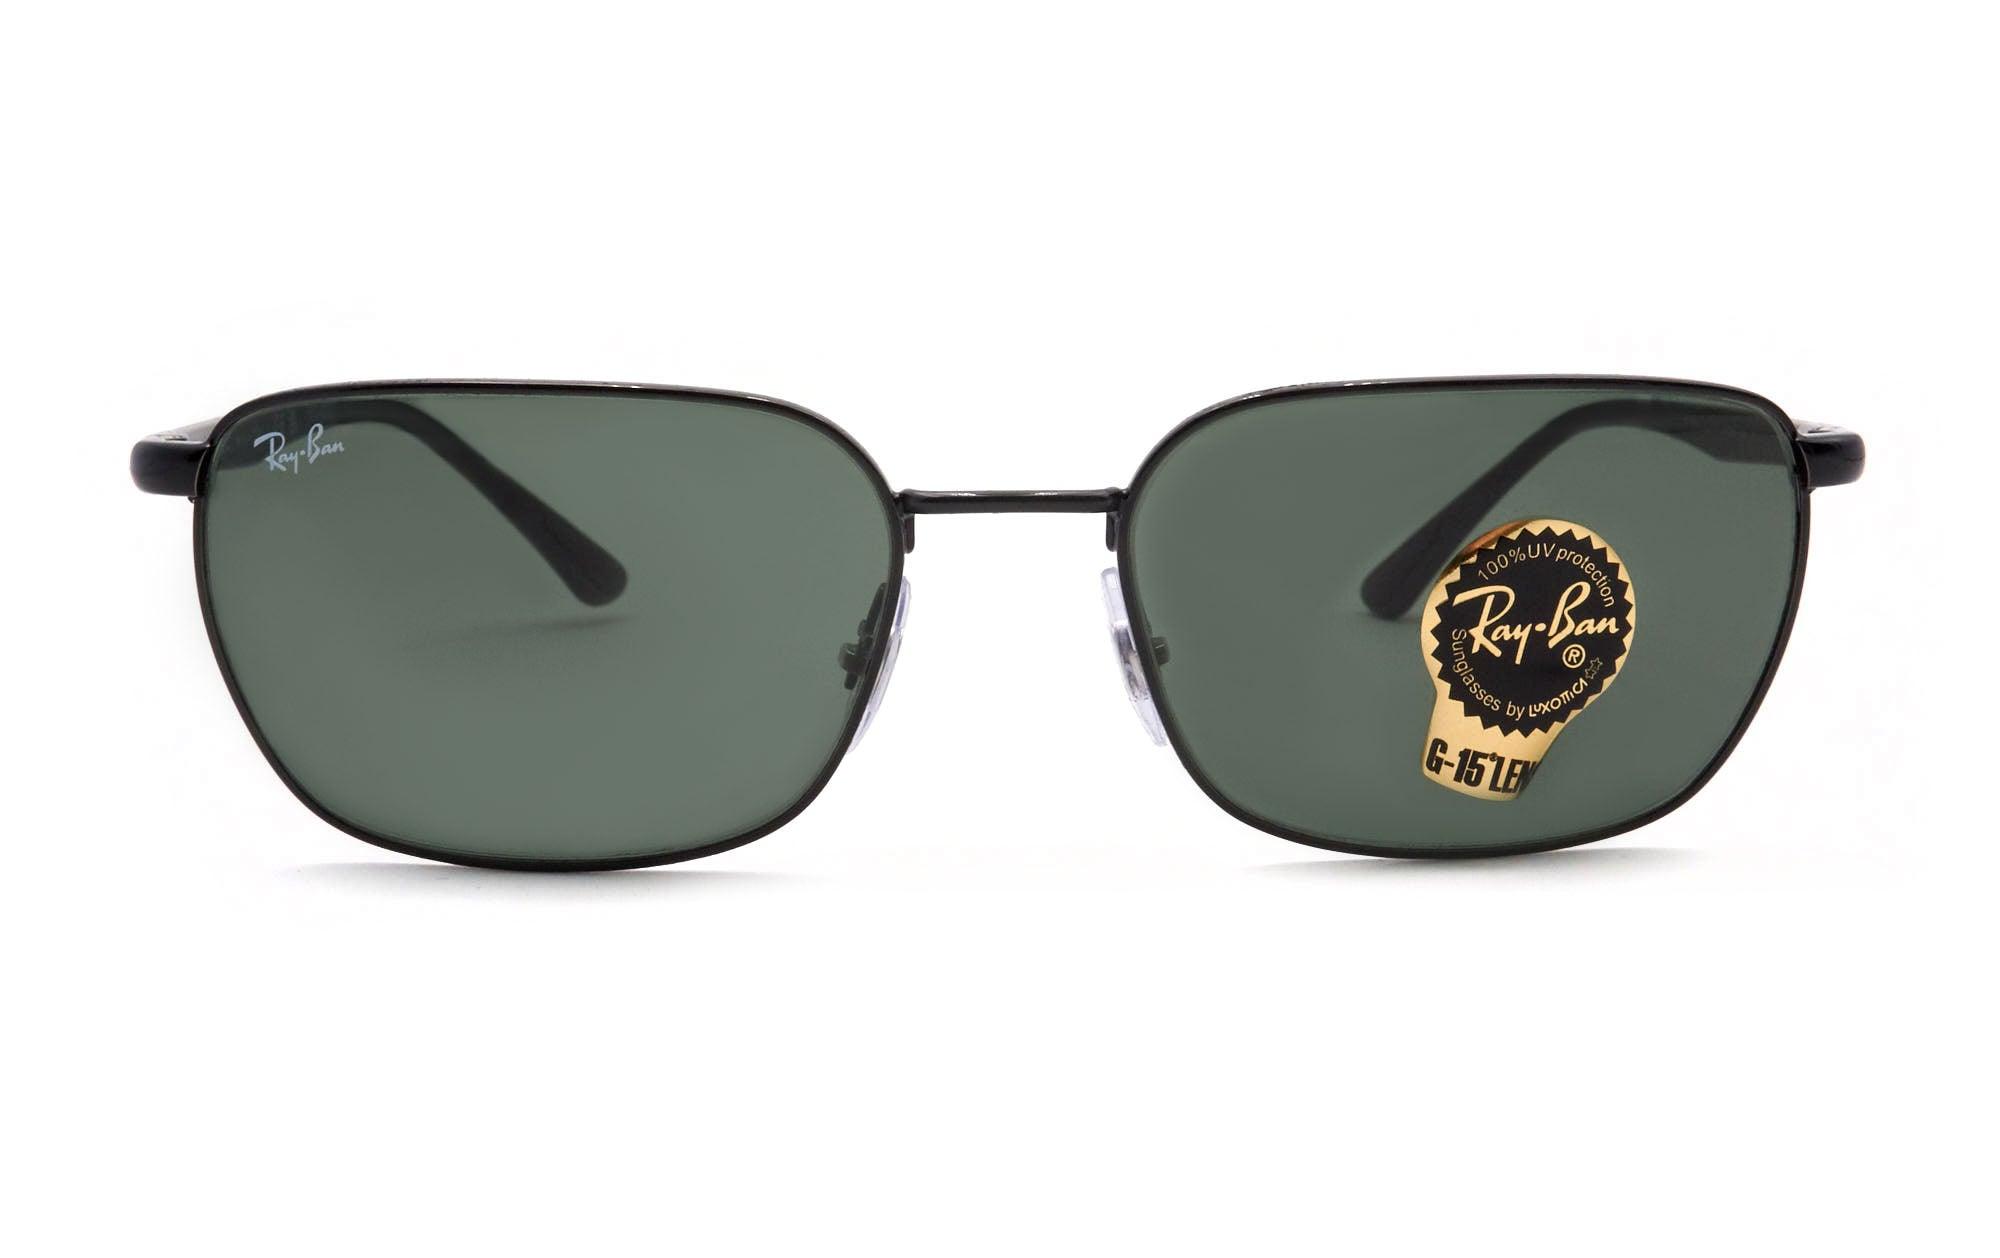 ray-ban 3684 002 31 - Opticas Lookout